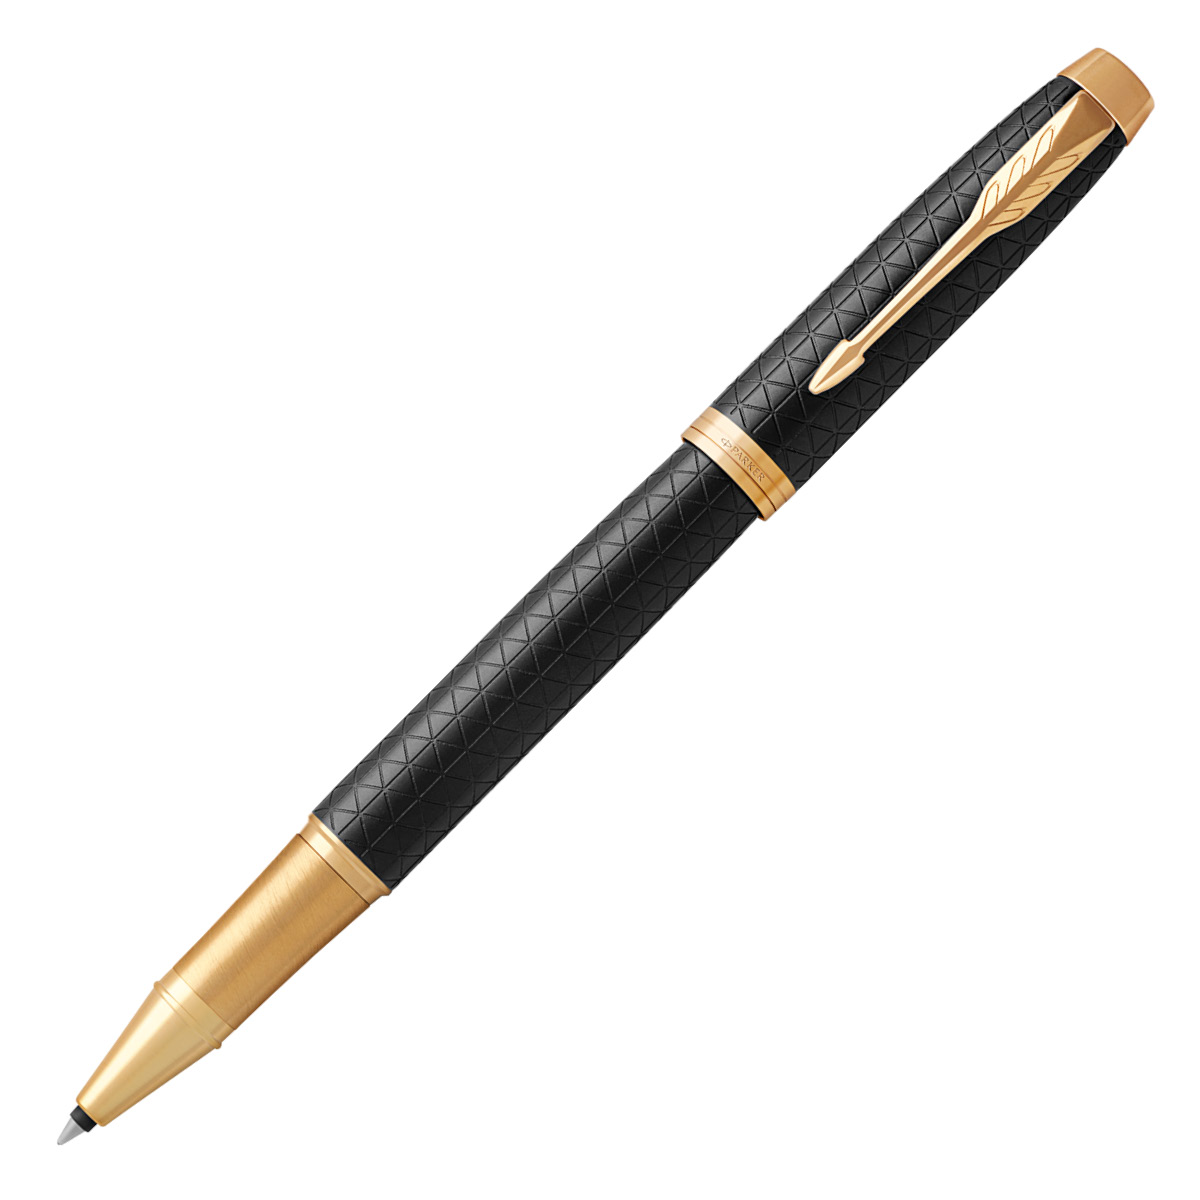 IM Premium Black/Gold Rollerball in the group Pens / Fine Writing / Gift Pens at Pen Store (112685)